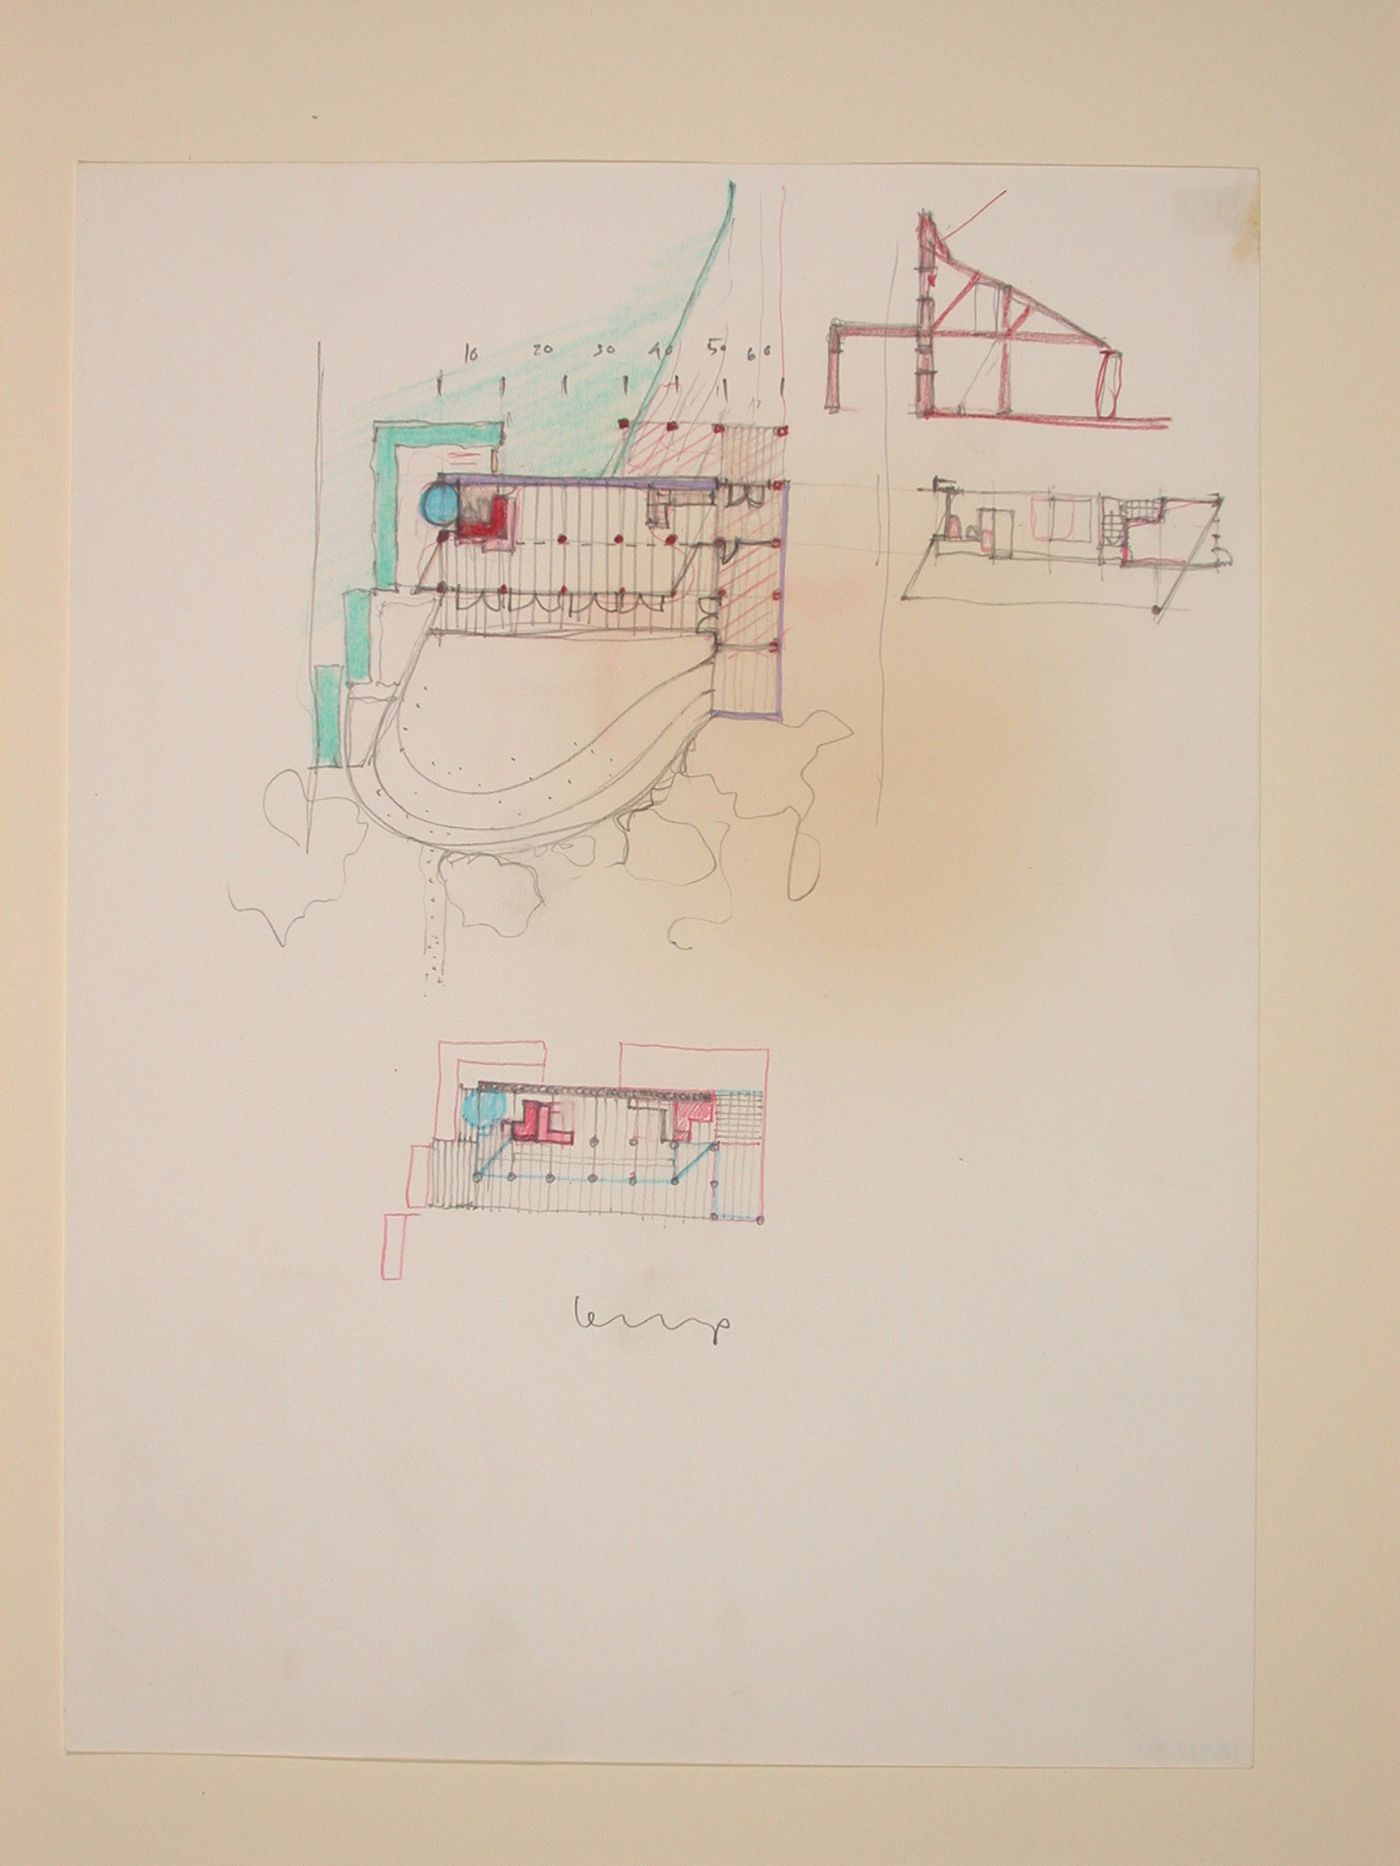 The Nofamily House - plans & section